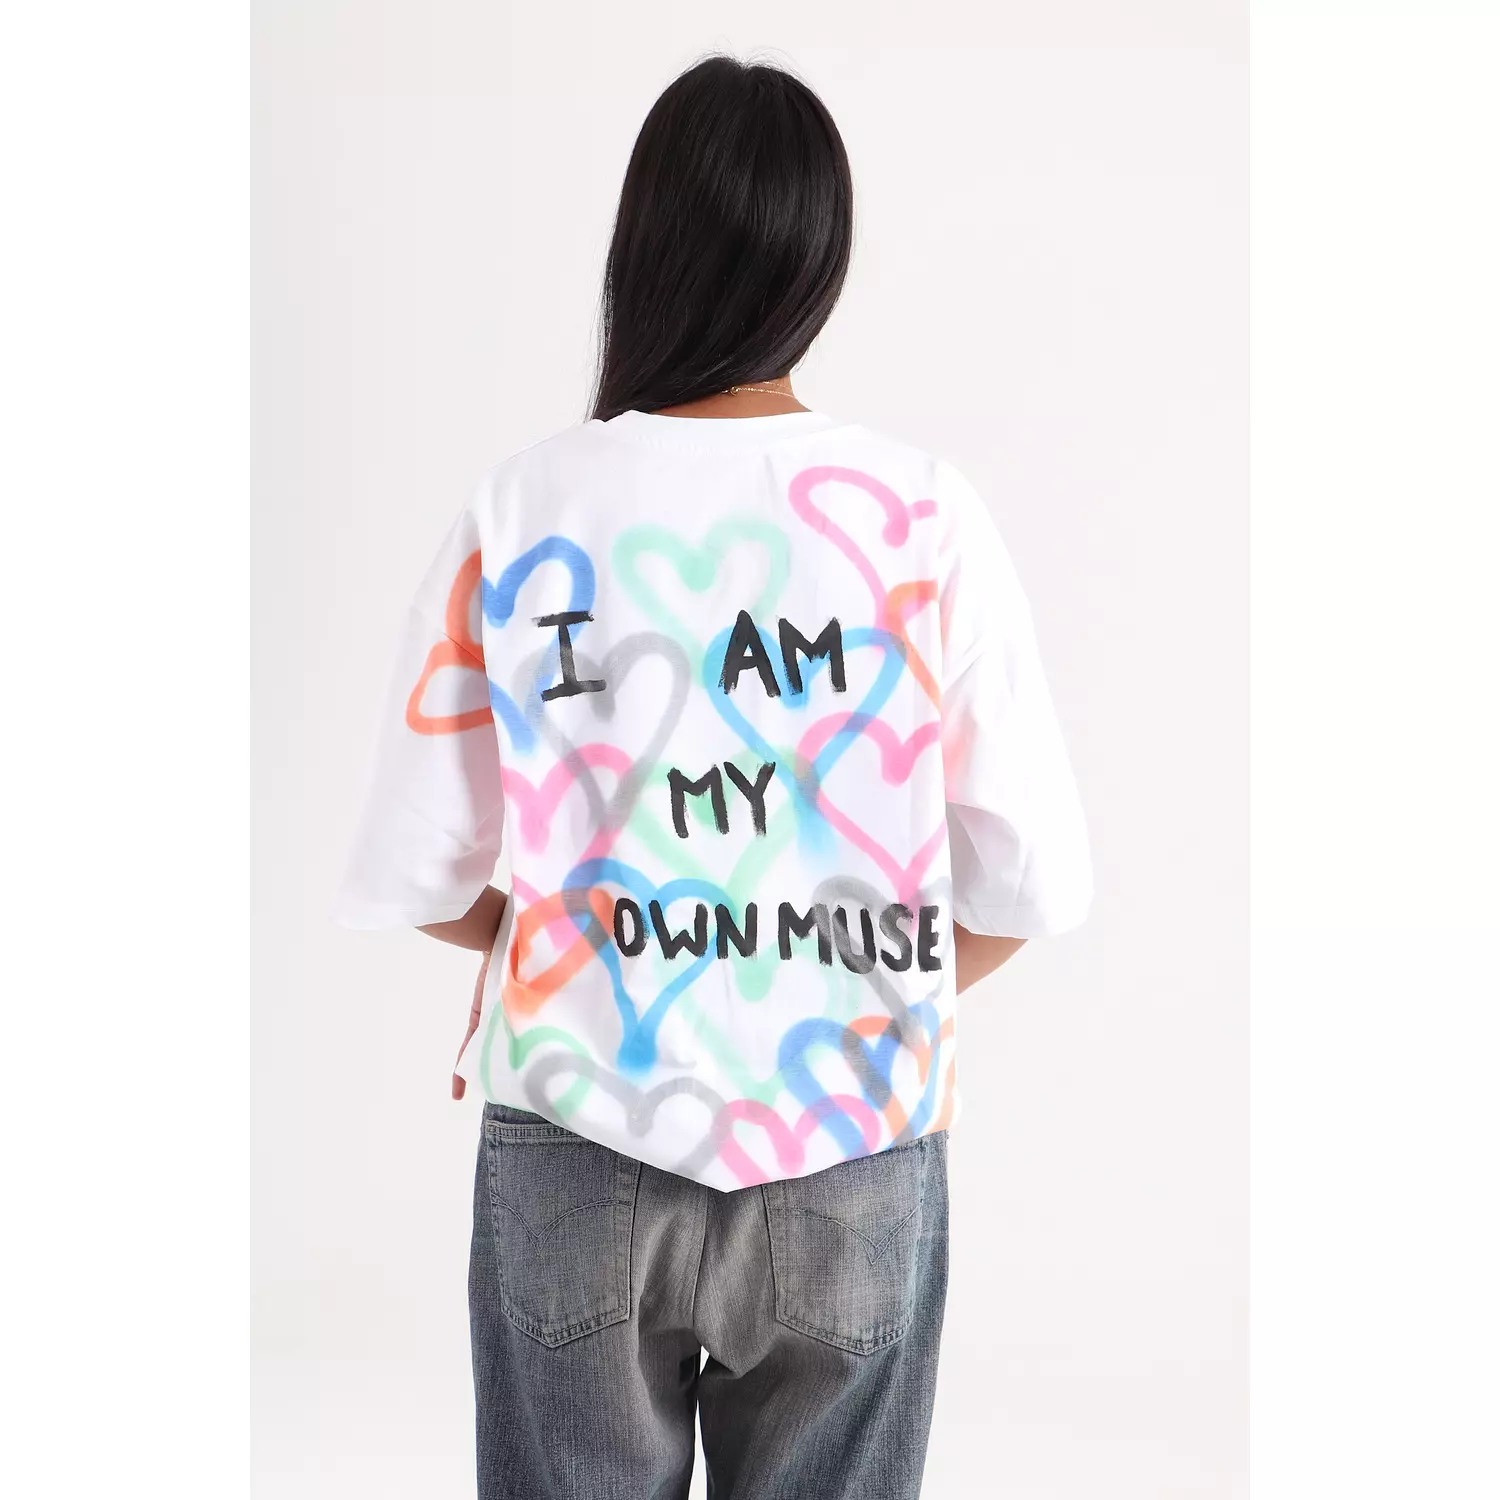 I am my own muse shirt hover image